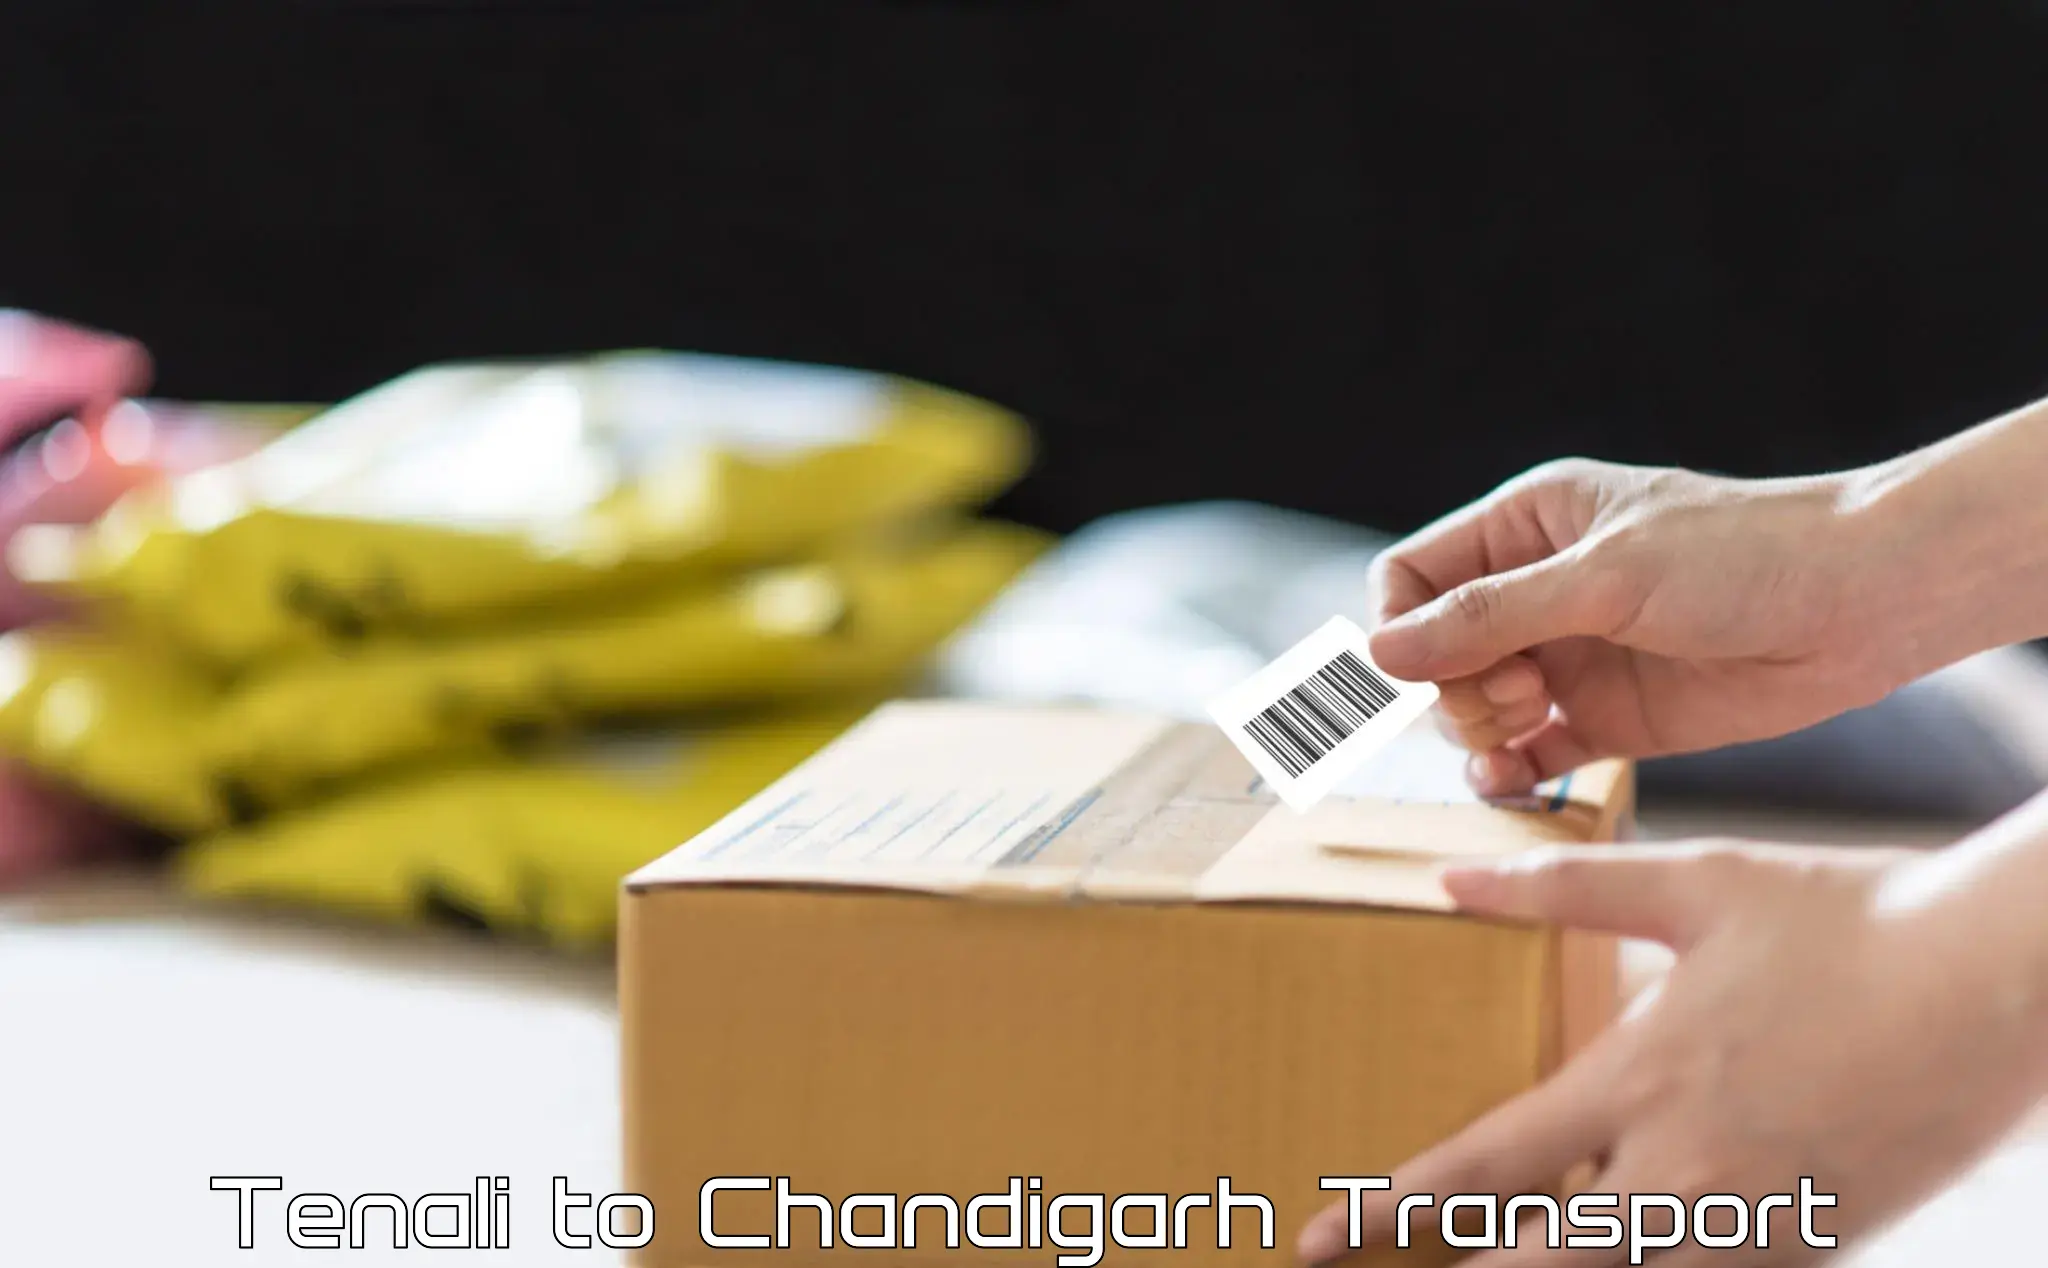 Goods delivery service Tenali to Chandigarh